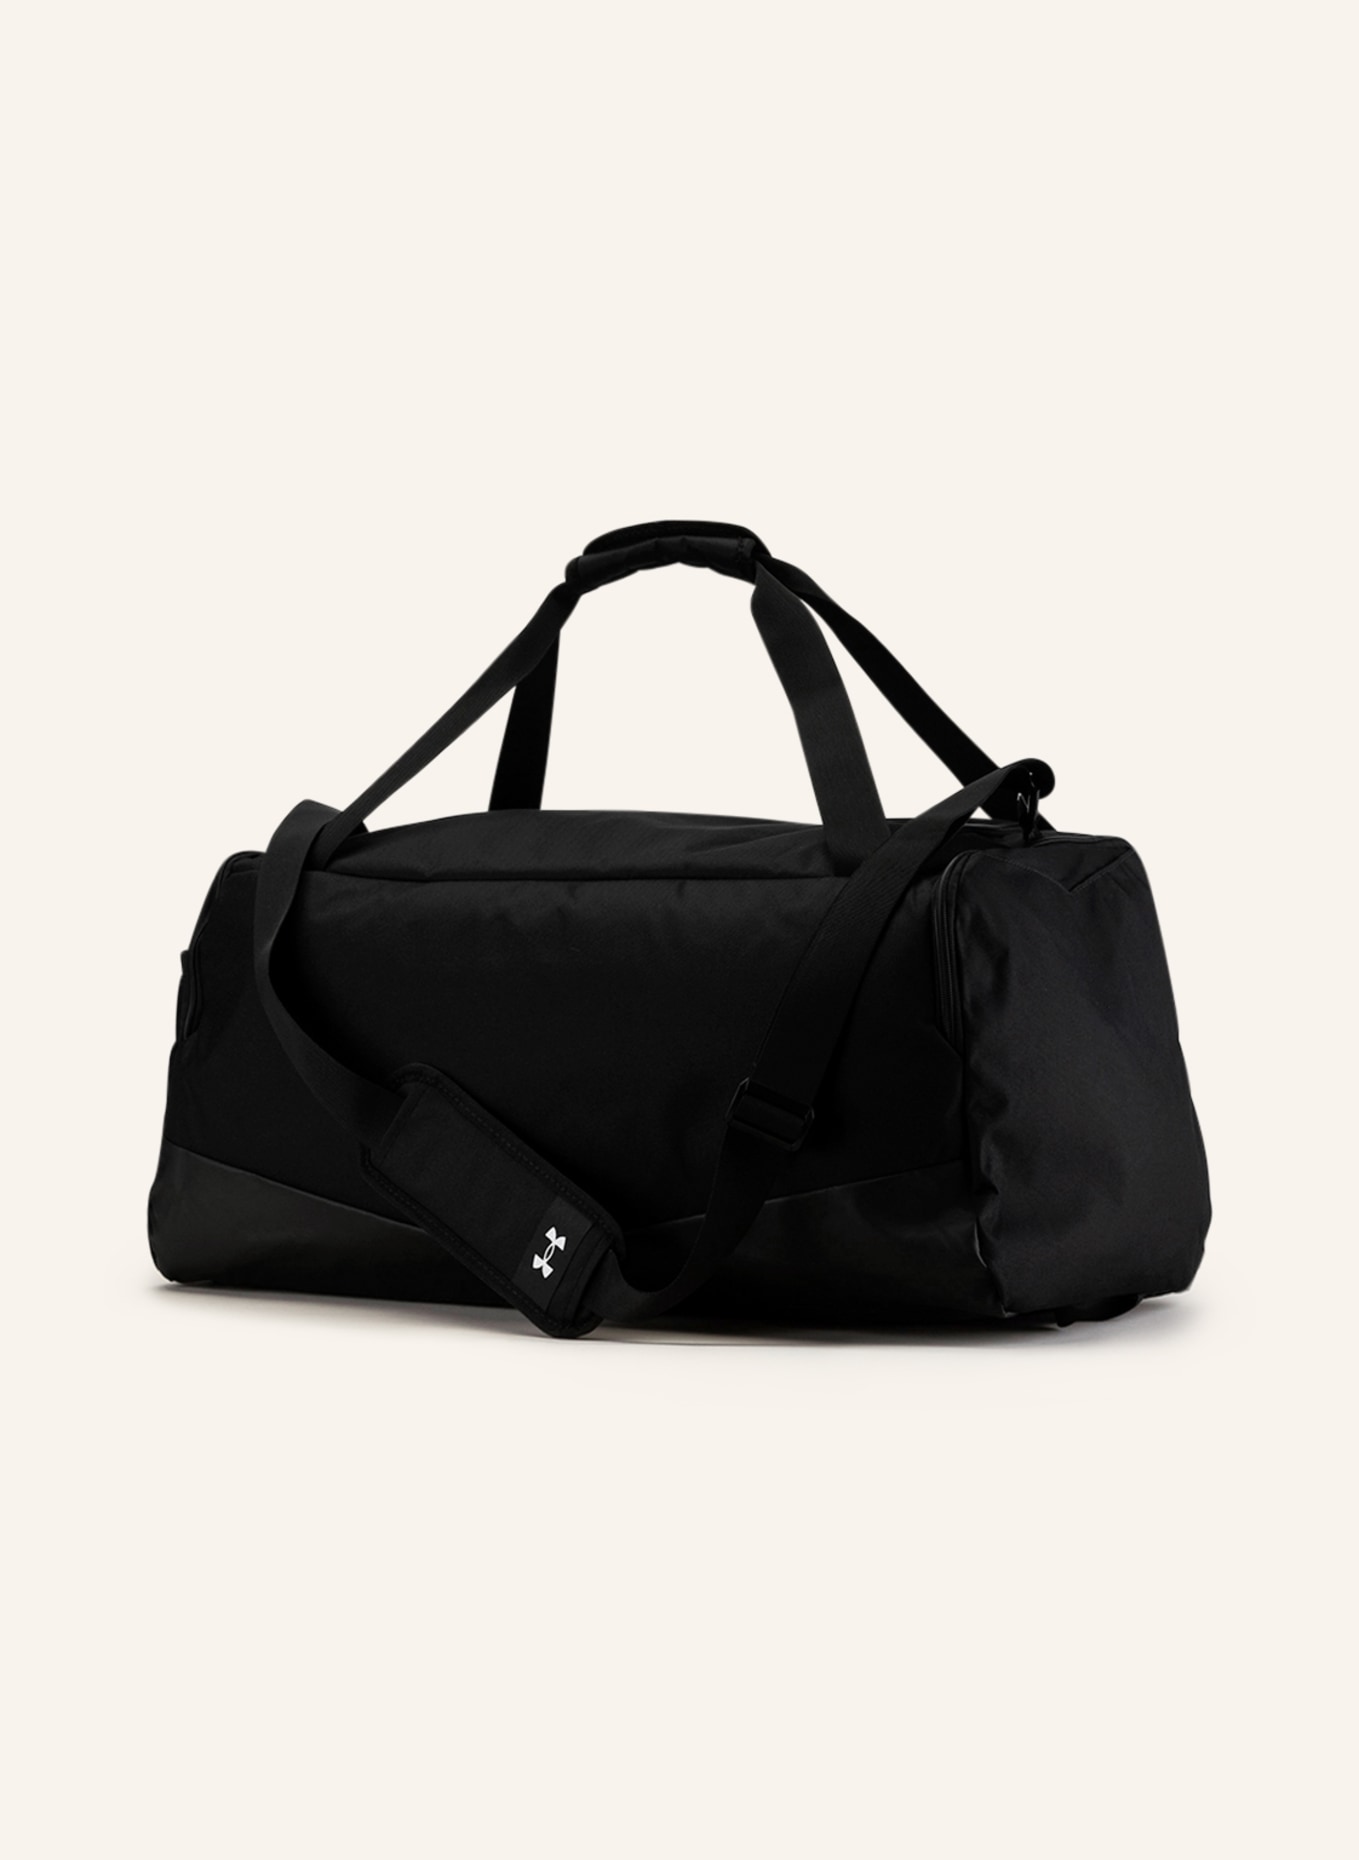 UNDER ARMOUR Gym bag UNDENIABLE 5.0 in black